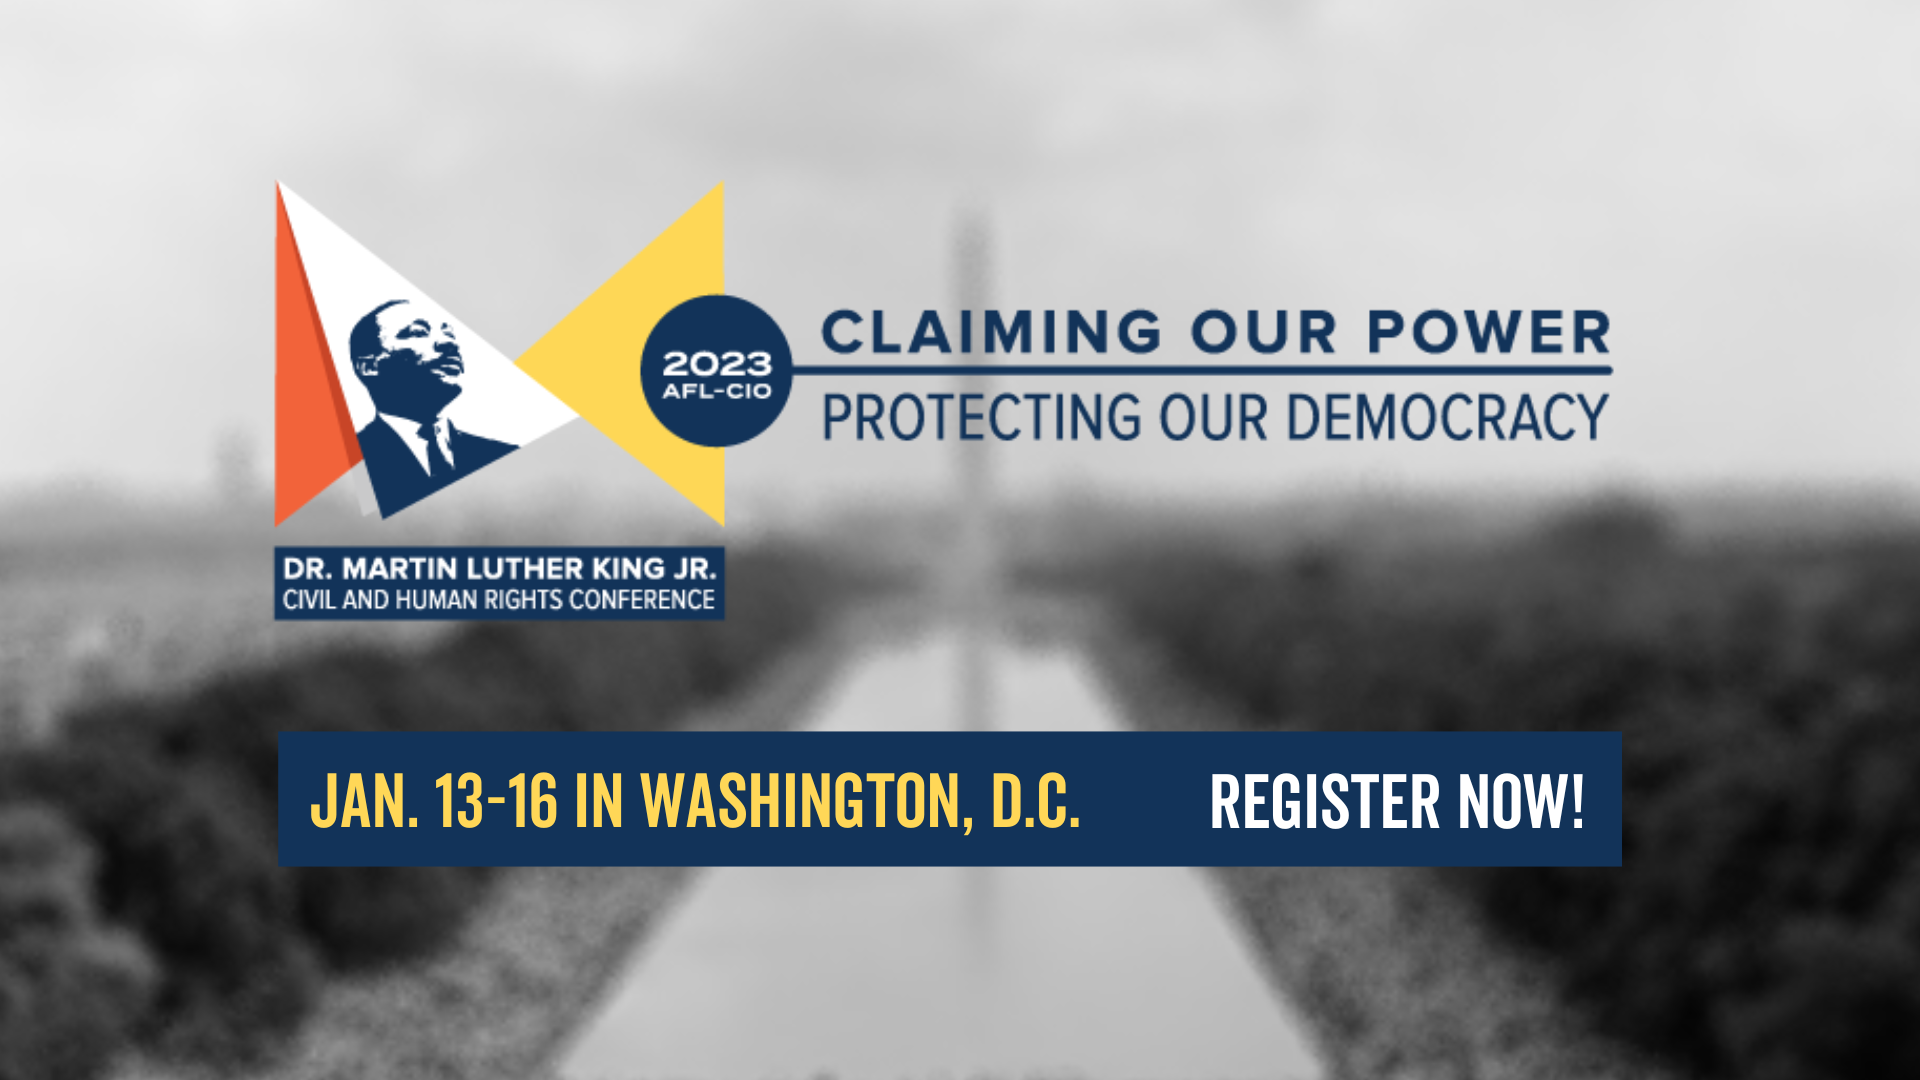 Dr. Martin Luther King Jr. Civil and Human Rights Conference. Claiming Our Power. Protecting Our Democracy. Jan. 13–16 in Washington, D.C. Register now!